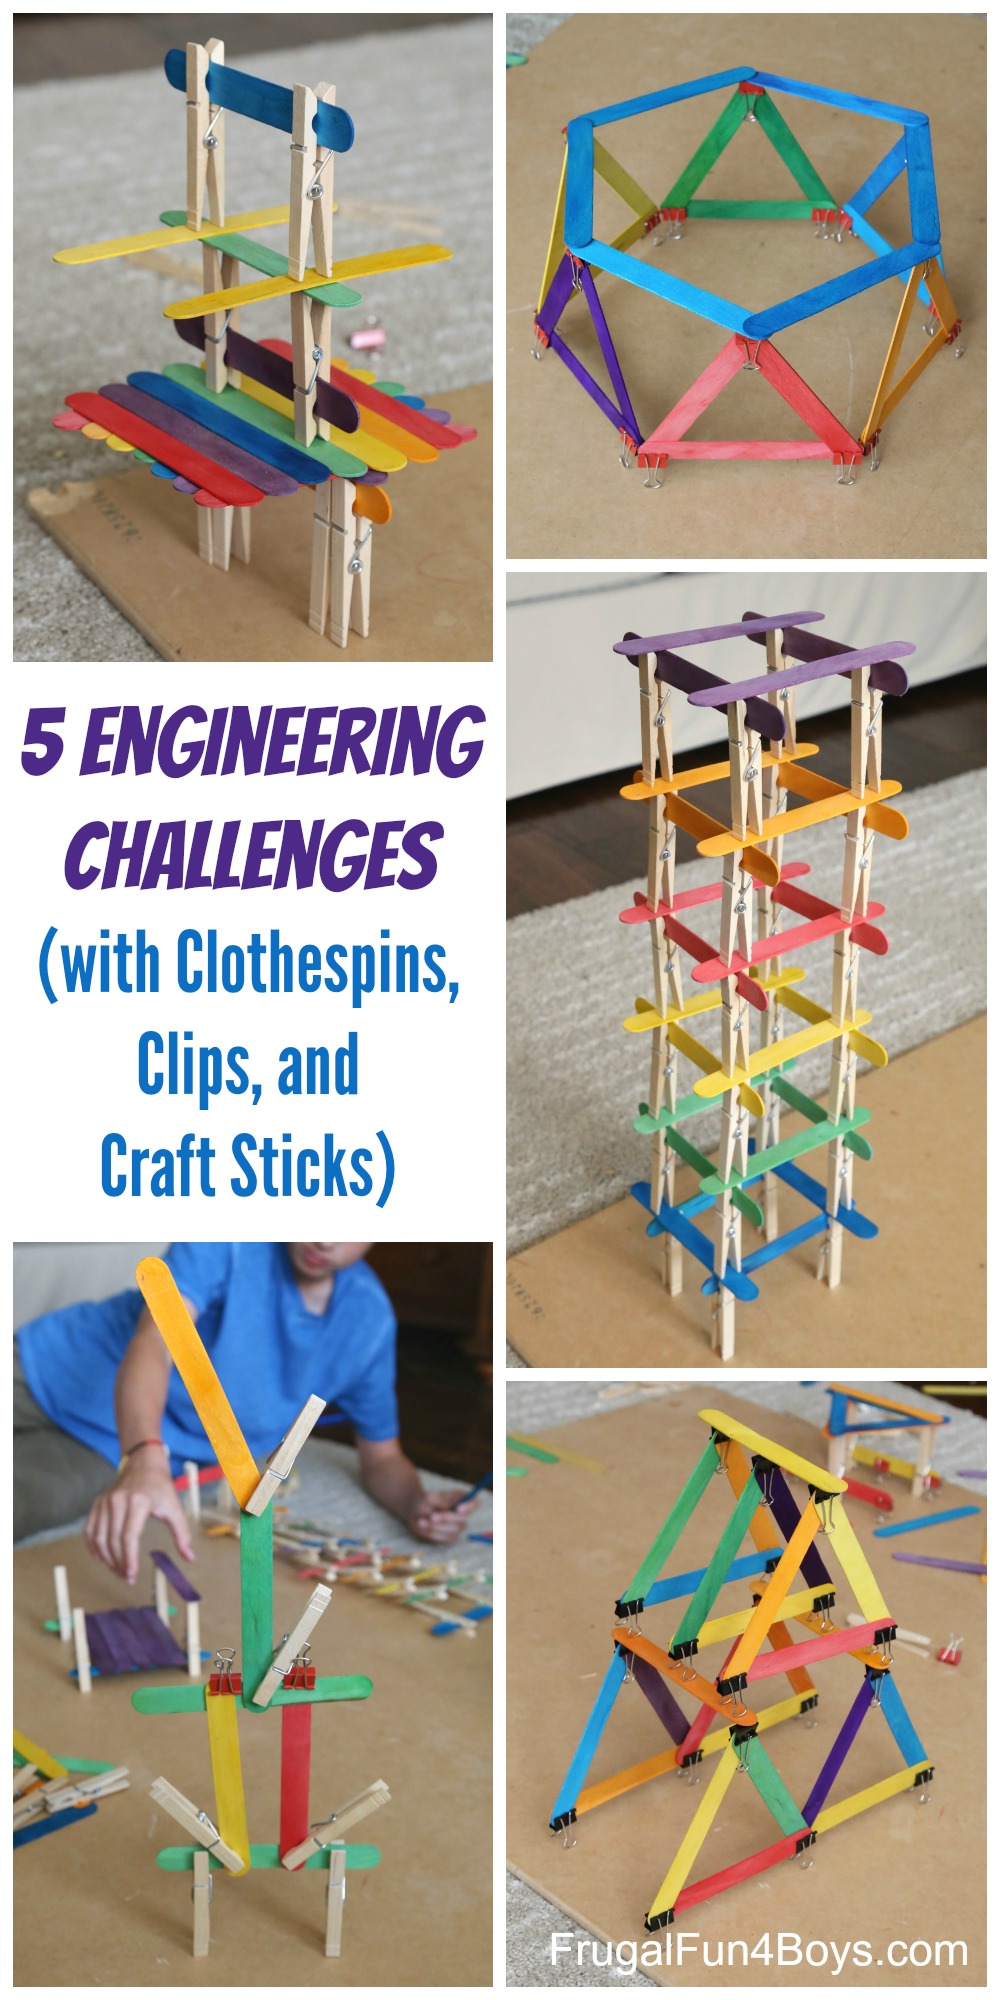  5 Engineering Challenges with Clothespins, Binder Clips, and Craft Sticks